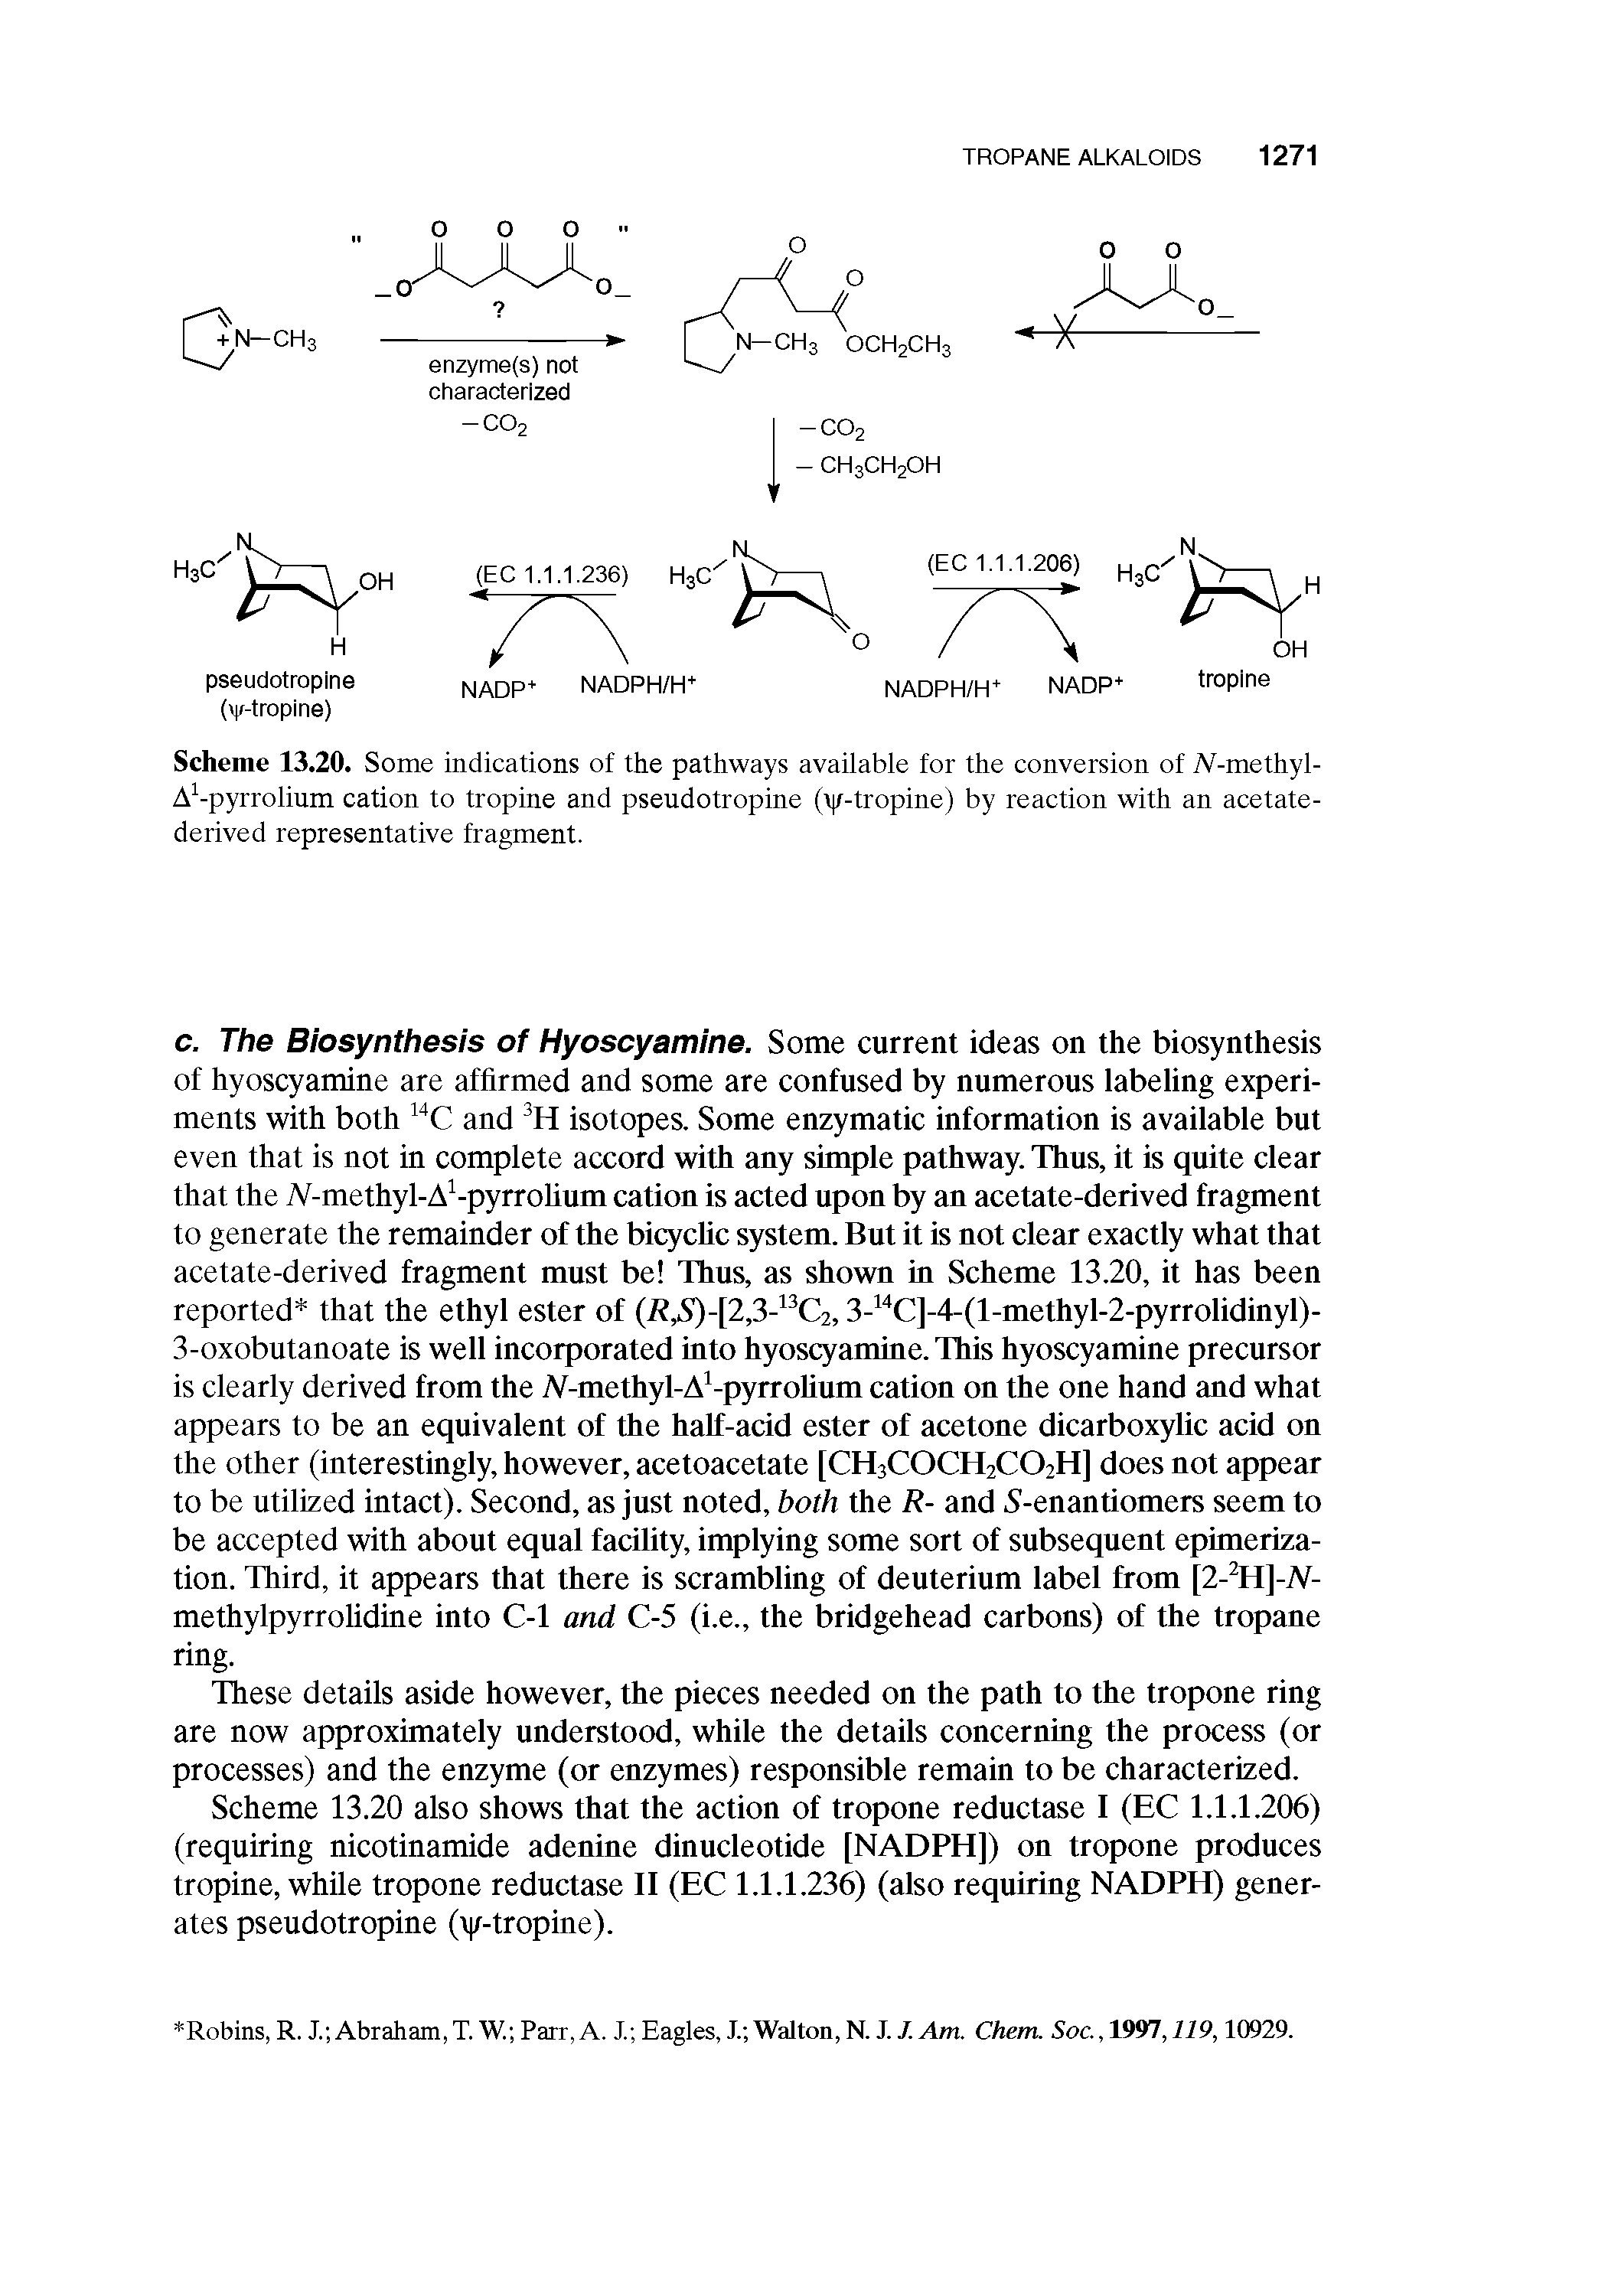 Scheme 13.20. Some indications of the pathways available for the conversion of Af-methyl-A -pyrrolium cation to tropine and pseudotropine ( r-tropine) by reaction with an acetate-derived representative fragment.